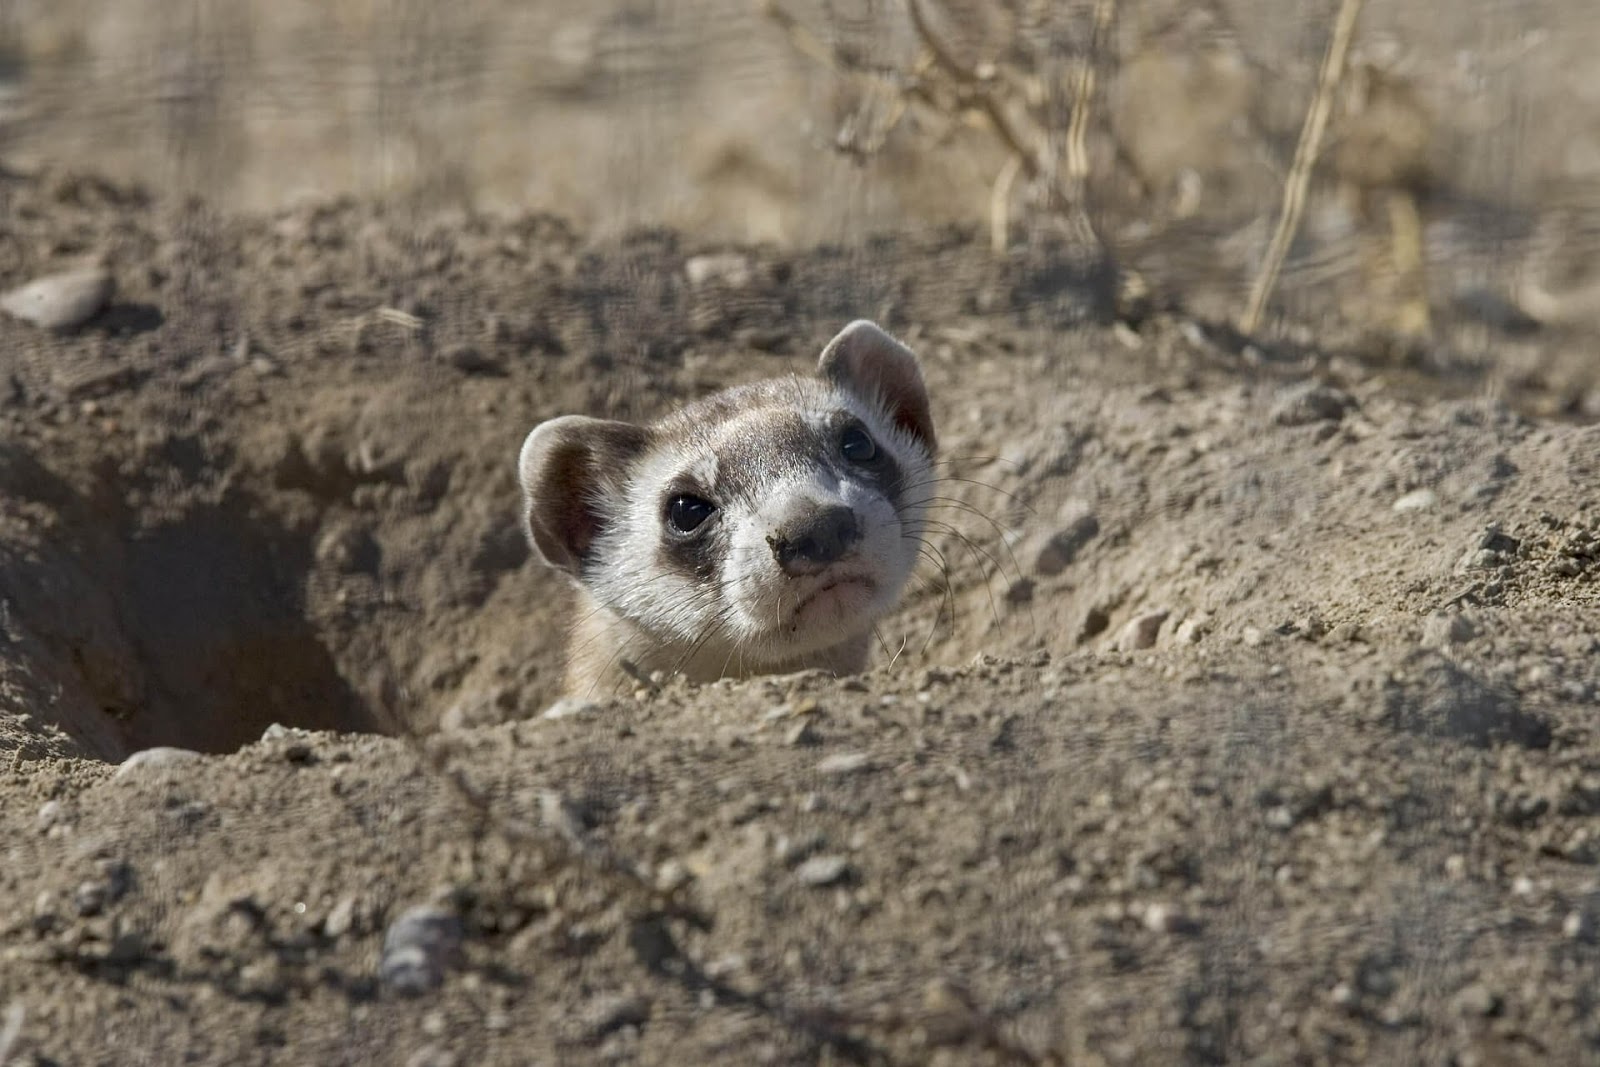 A black-footed ferret poking its head out of a hole